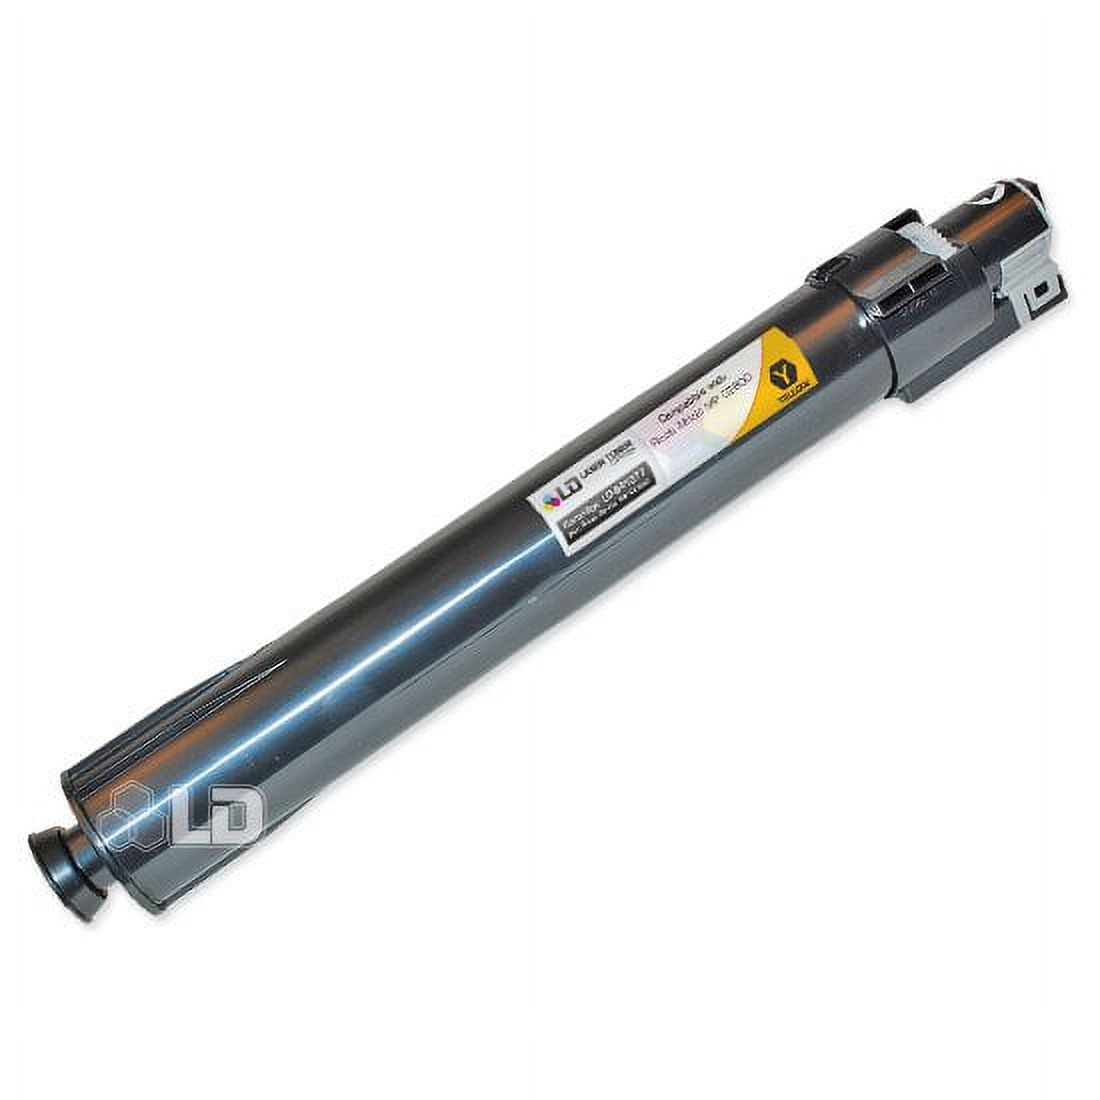 LD Compatible Replacement for Ricoh 841277 Yellow Laser Toner Cartridge for use in Ricoh Aficio, Lanier, and Gestetner - image 1 of 2